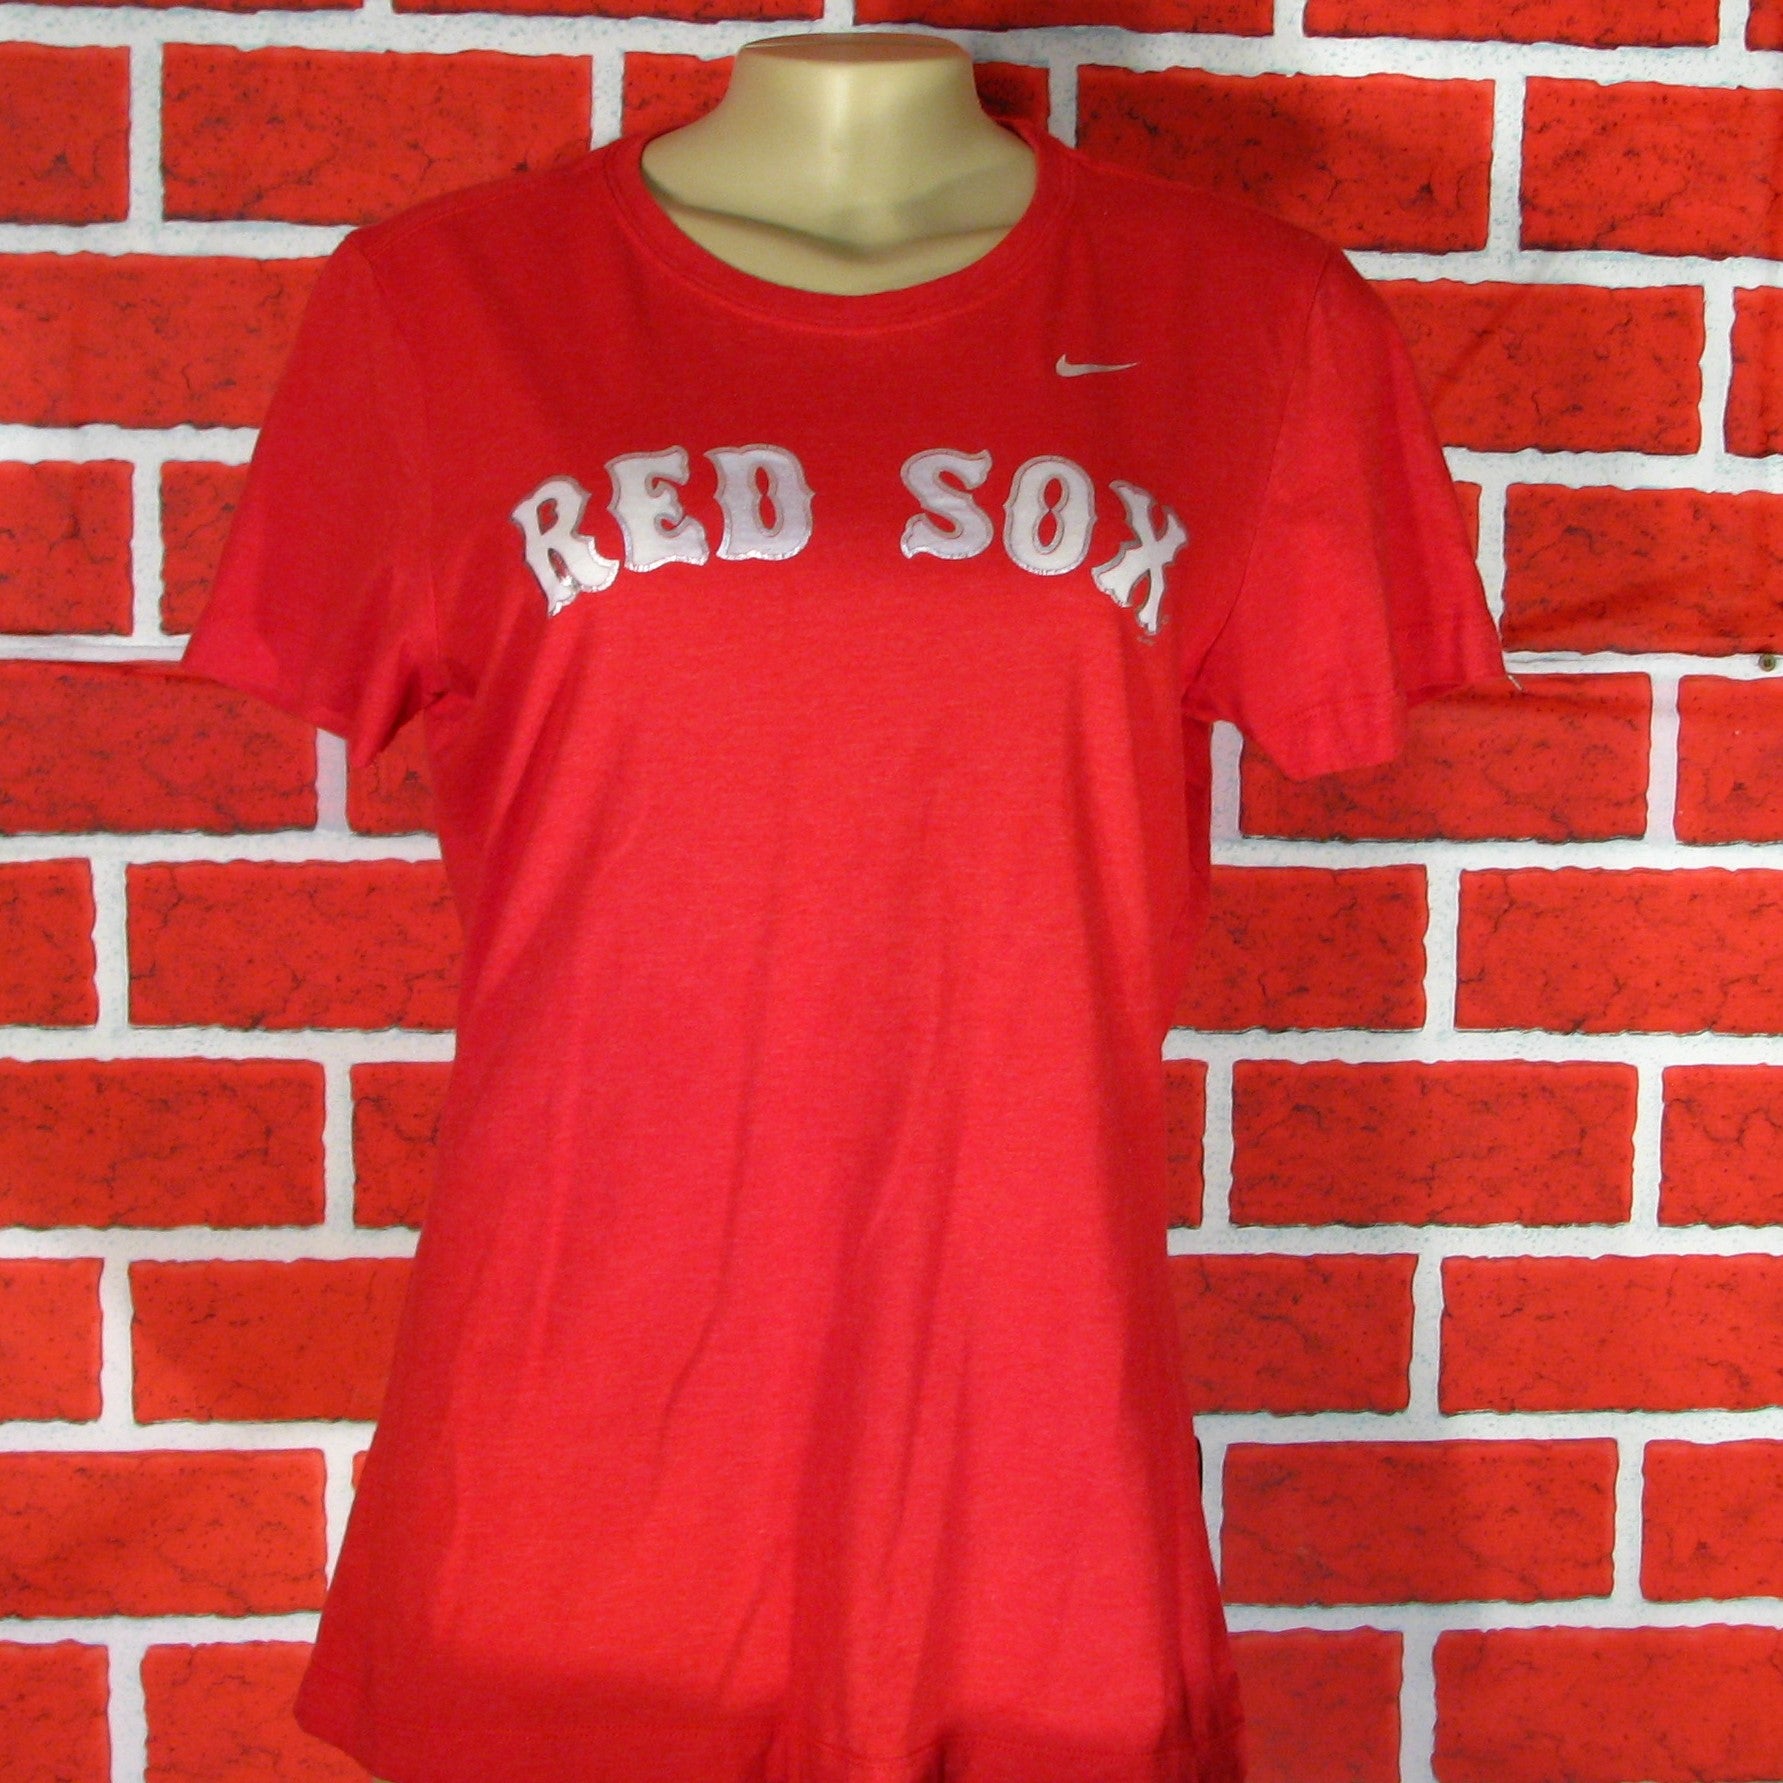 womens red sox t shirts